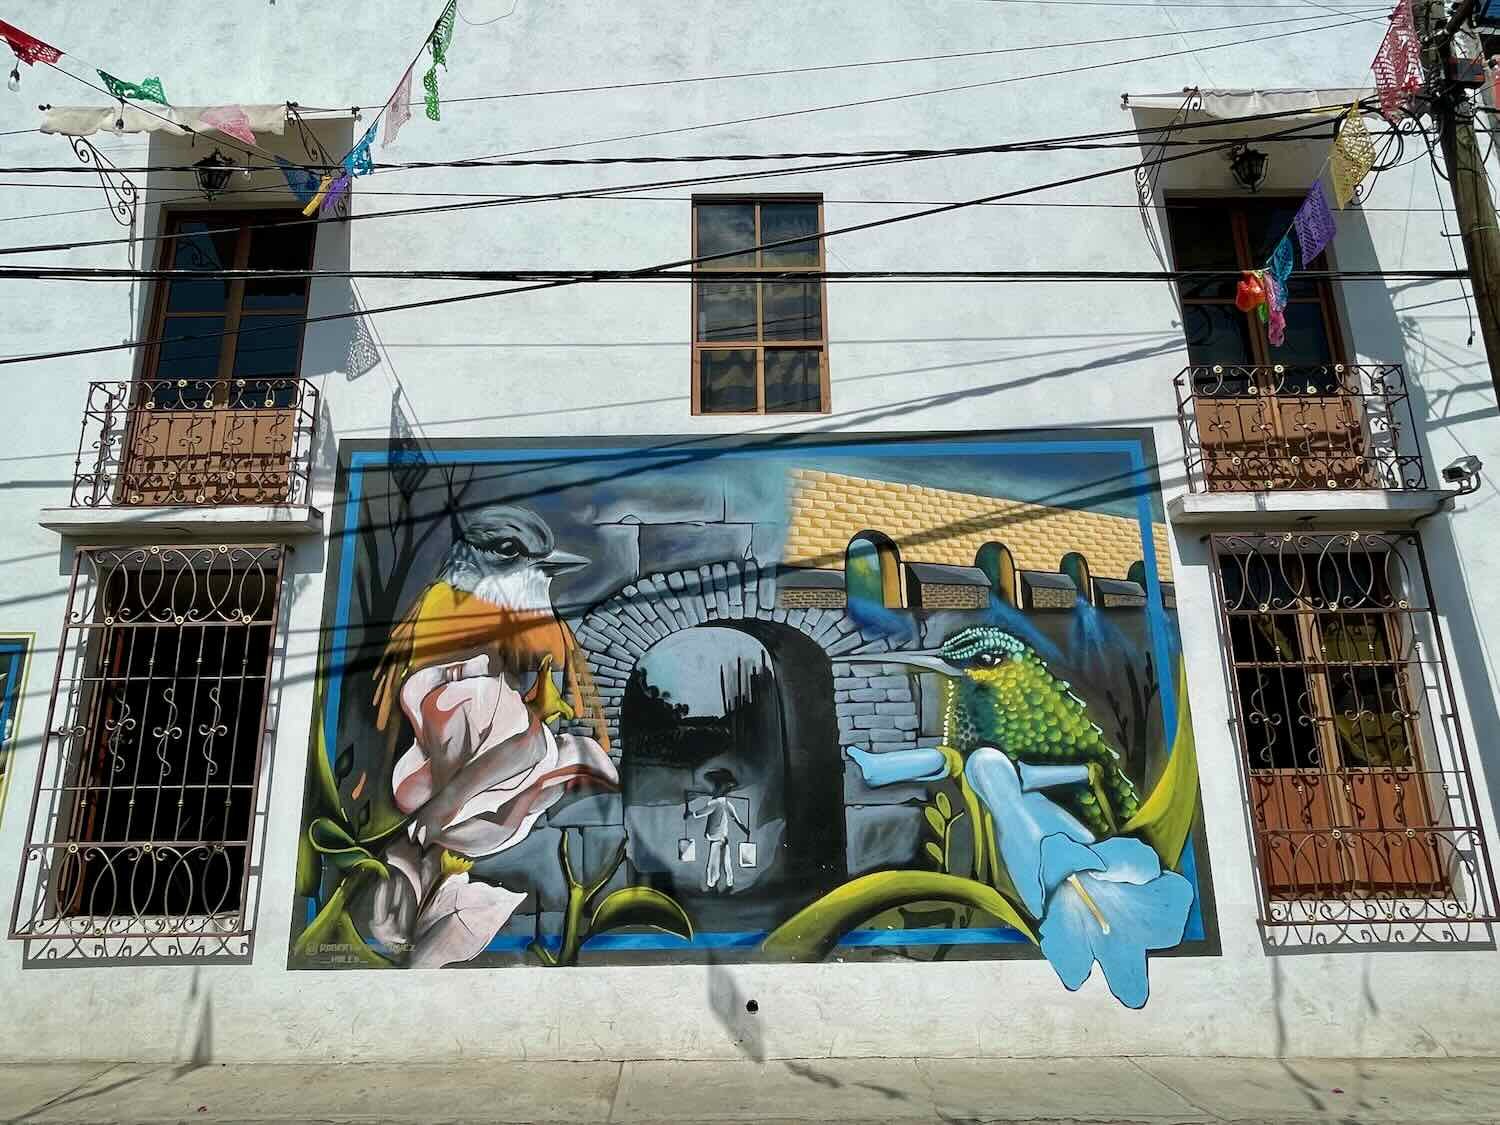 Another colorful mural along Calle San Felipe del Agua